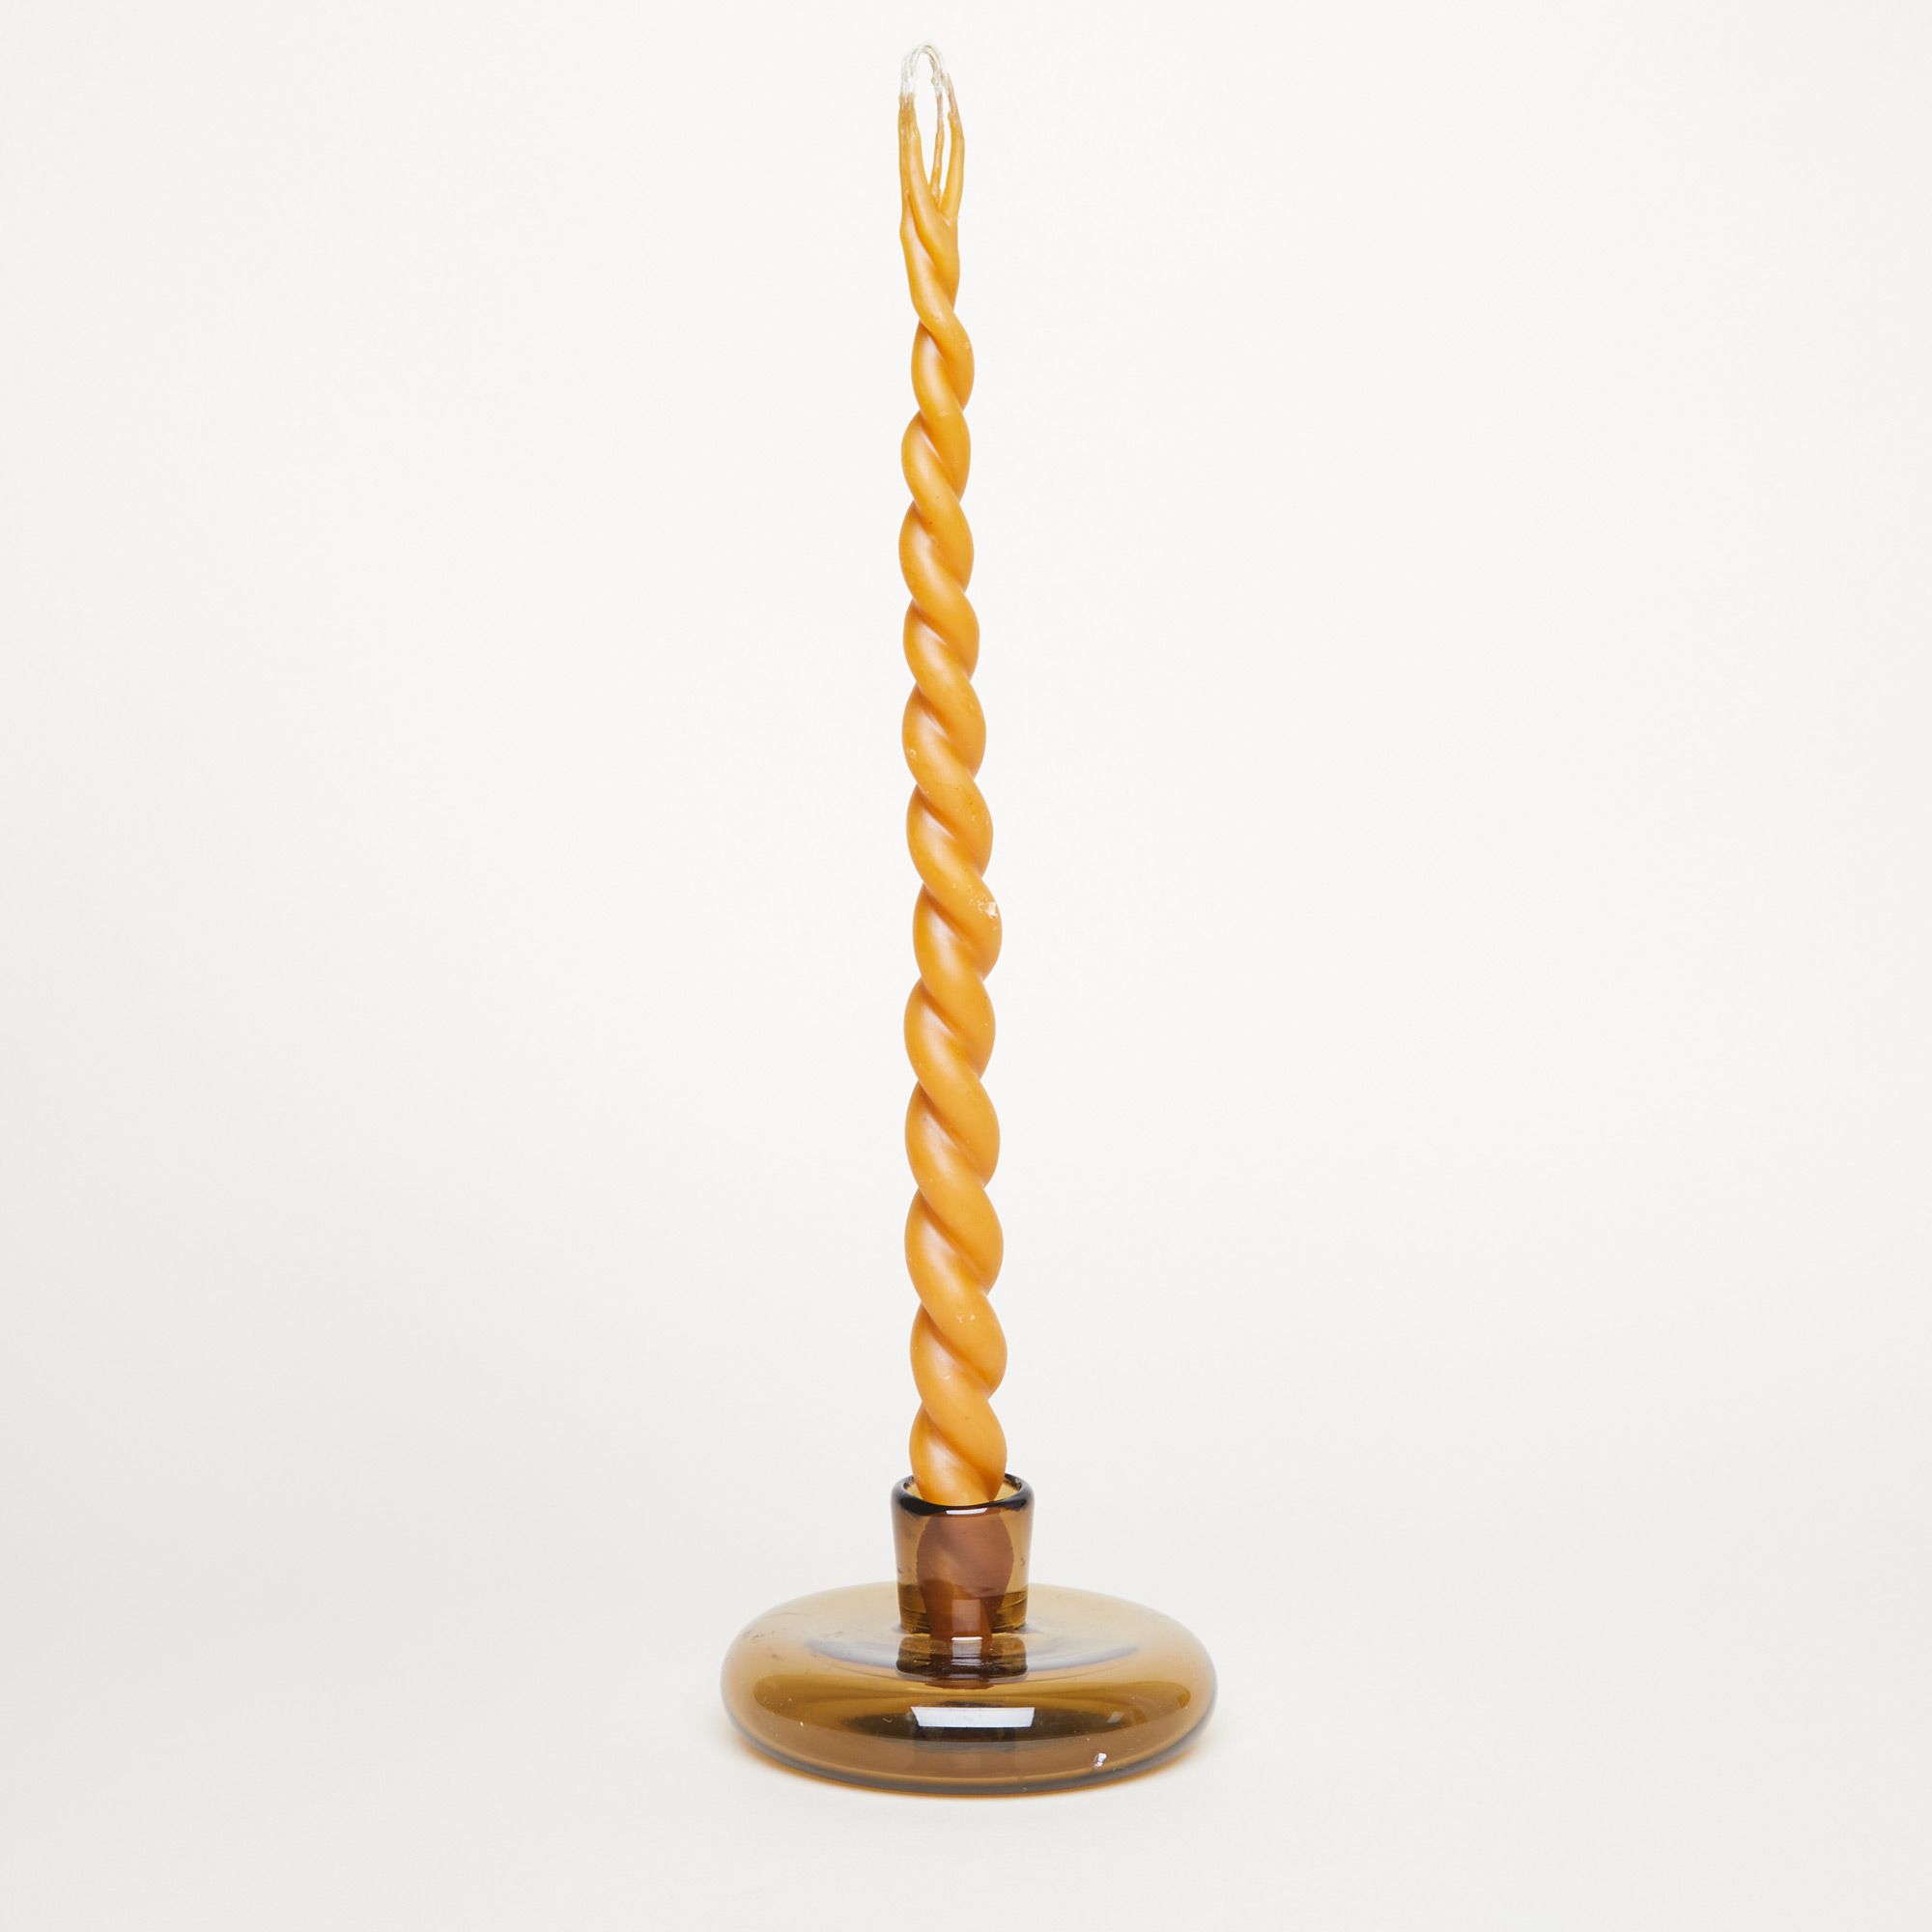 A long, yellow twisted wax candle with a double wick stands in a clear brown circular candle holder